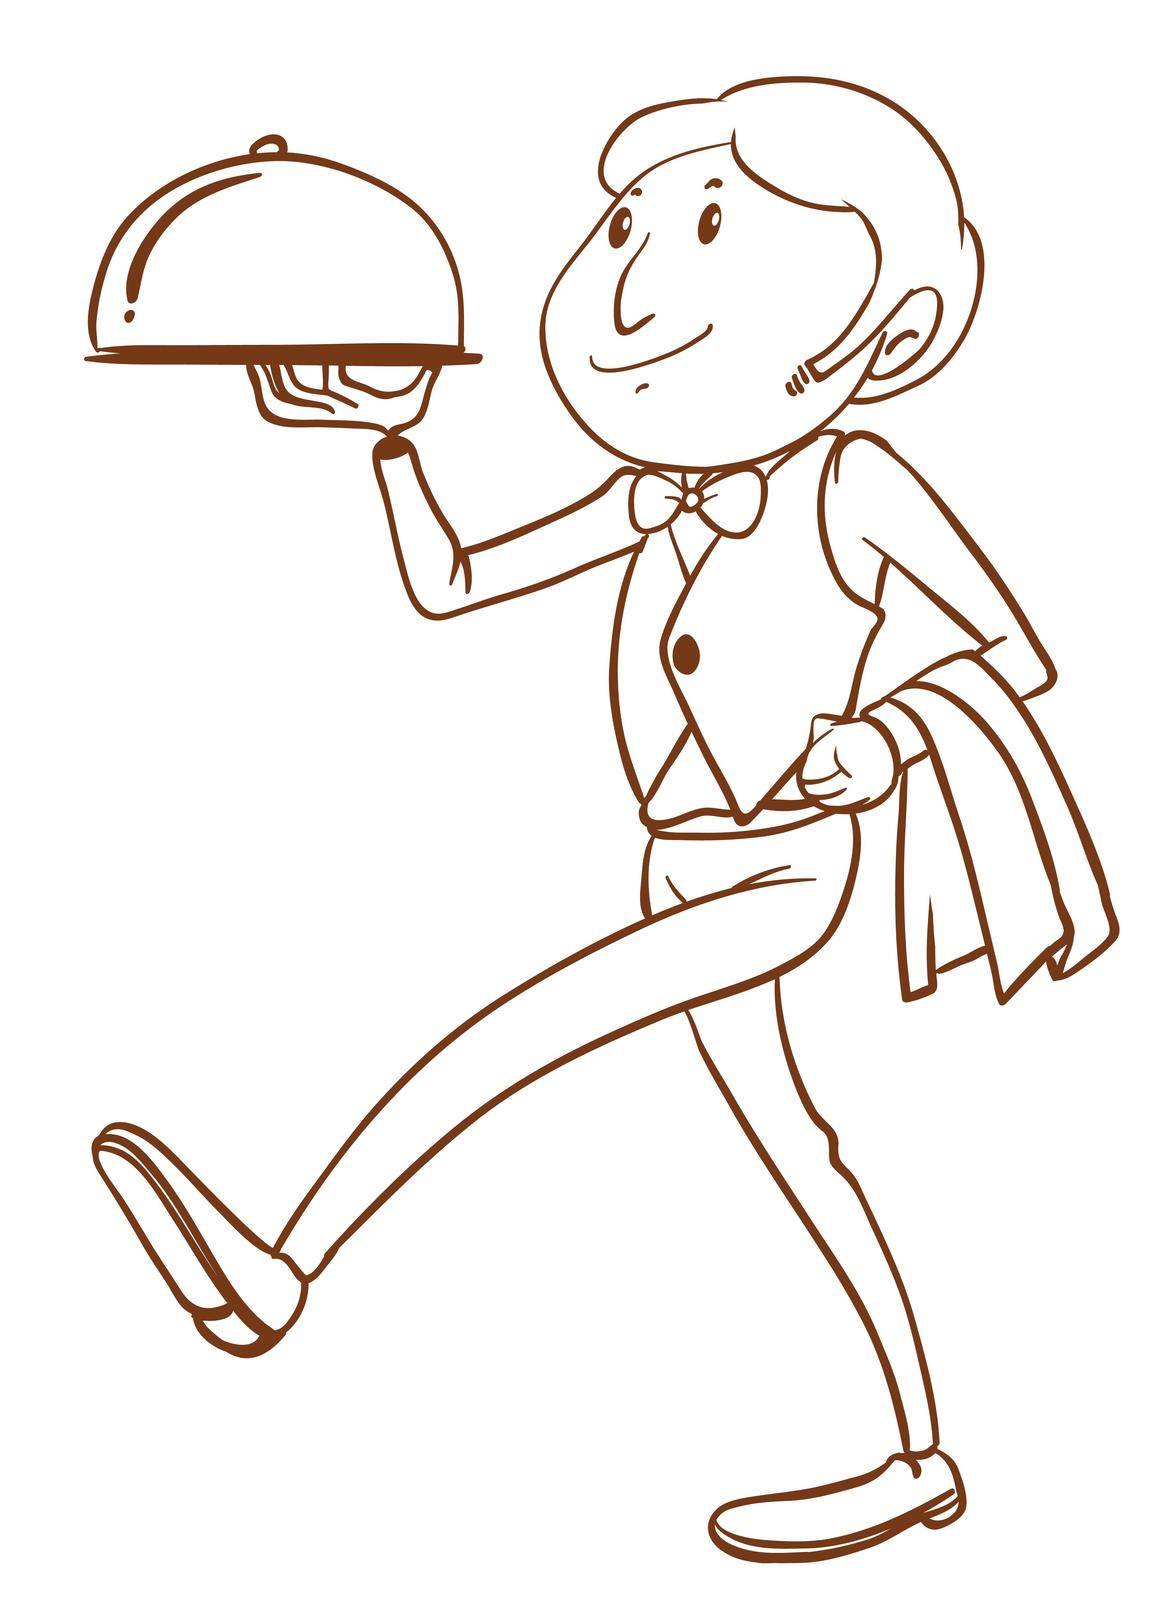 A simple drawing of a waiter by iimages